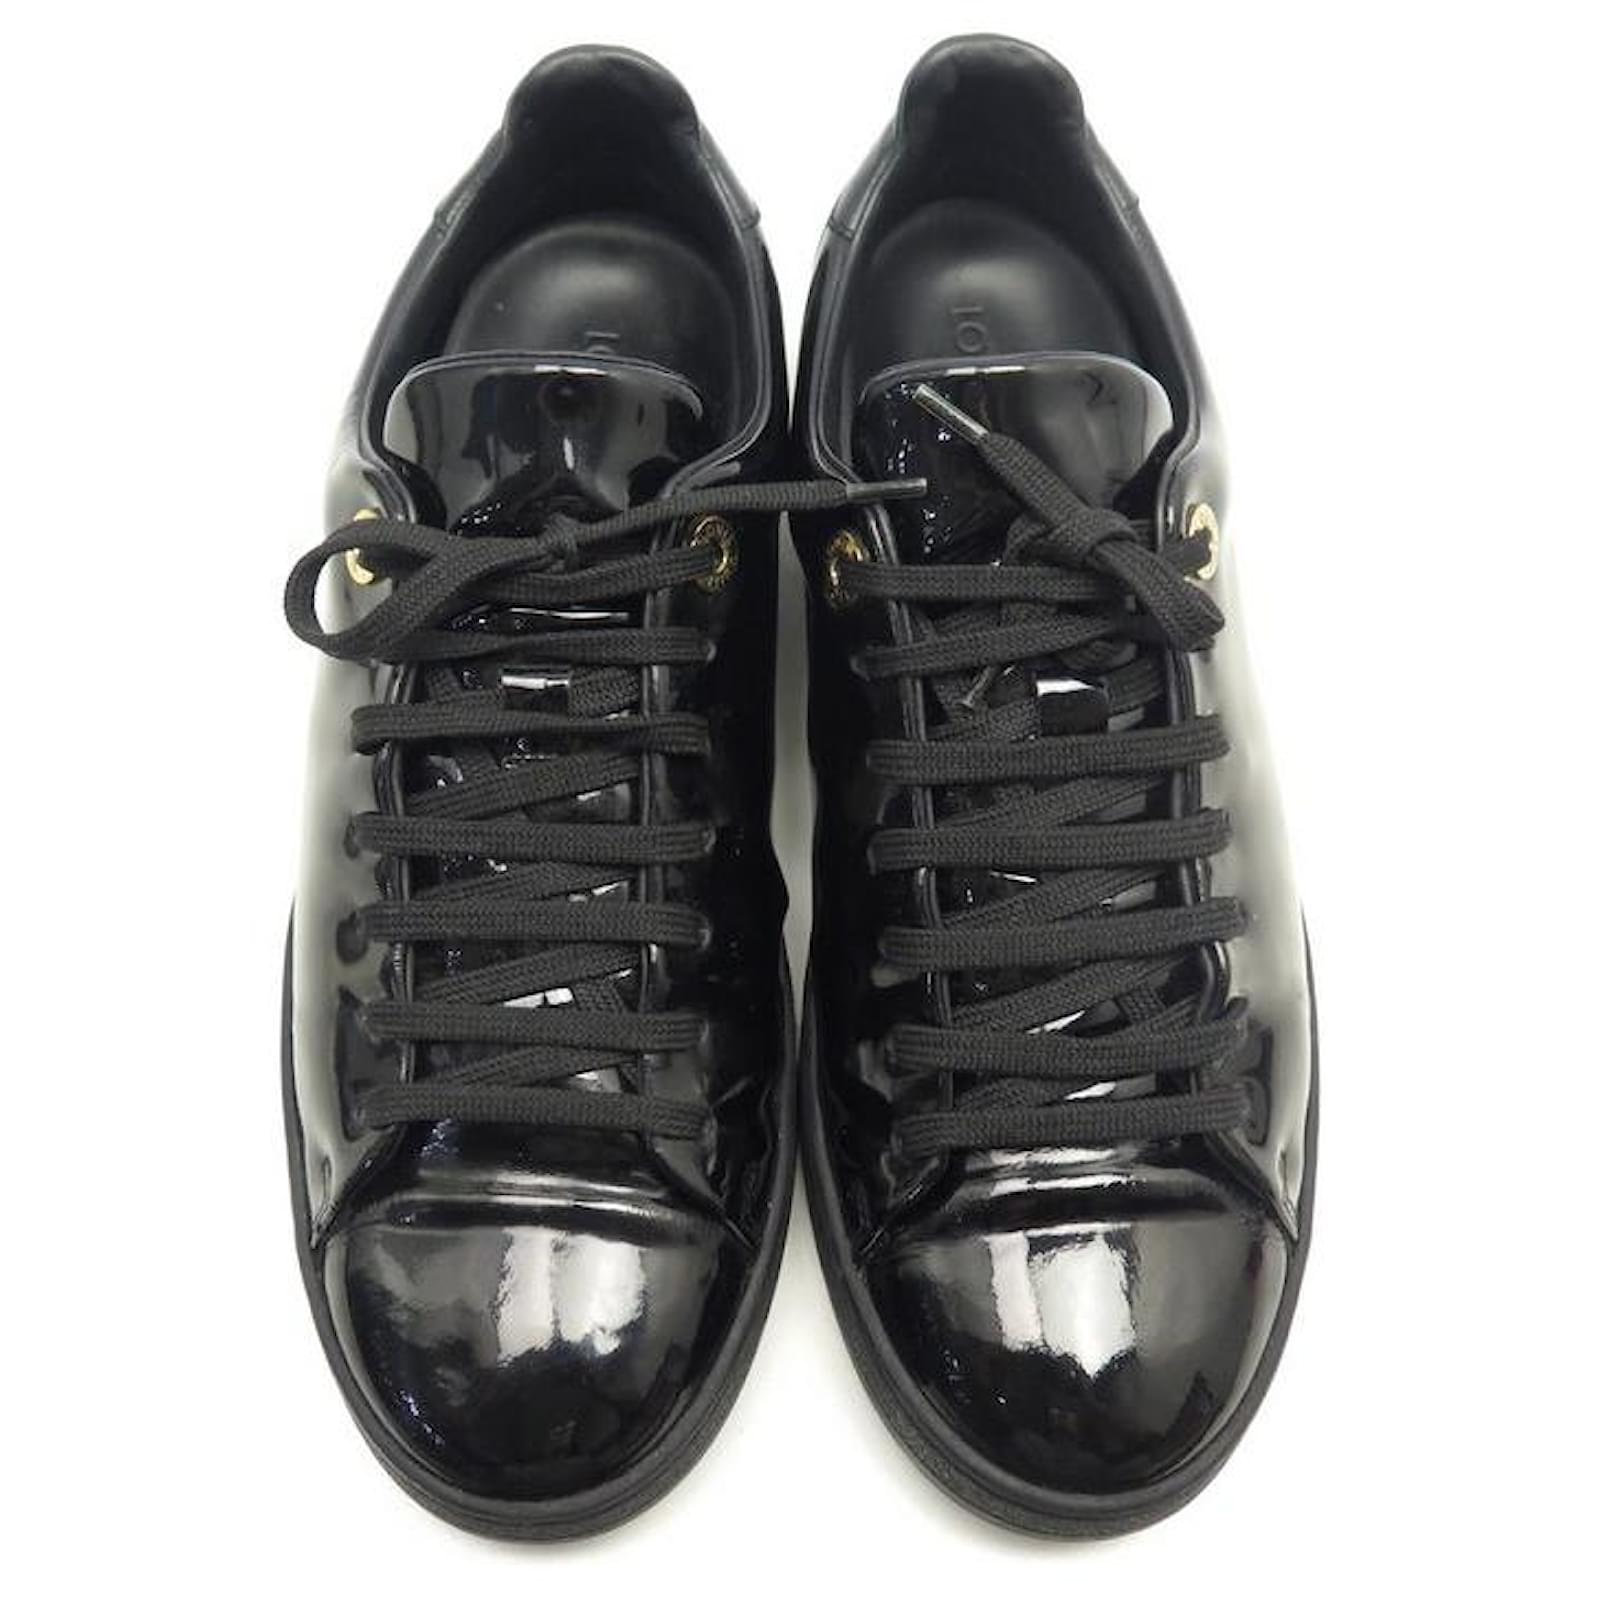 Louis Vuitton Patent Leather Front Row Sneakers - Size 7.5 / 37.5